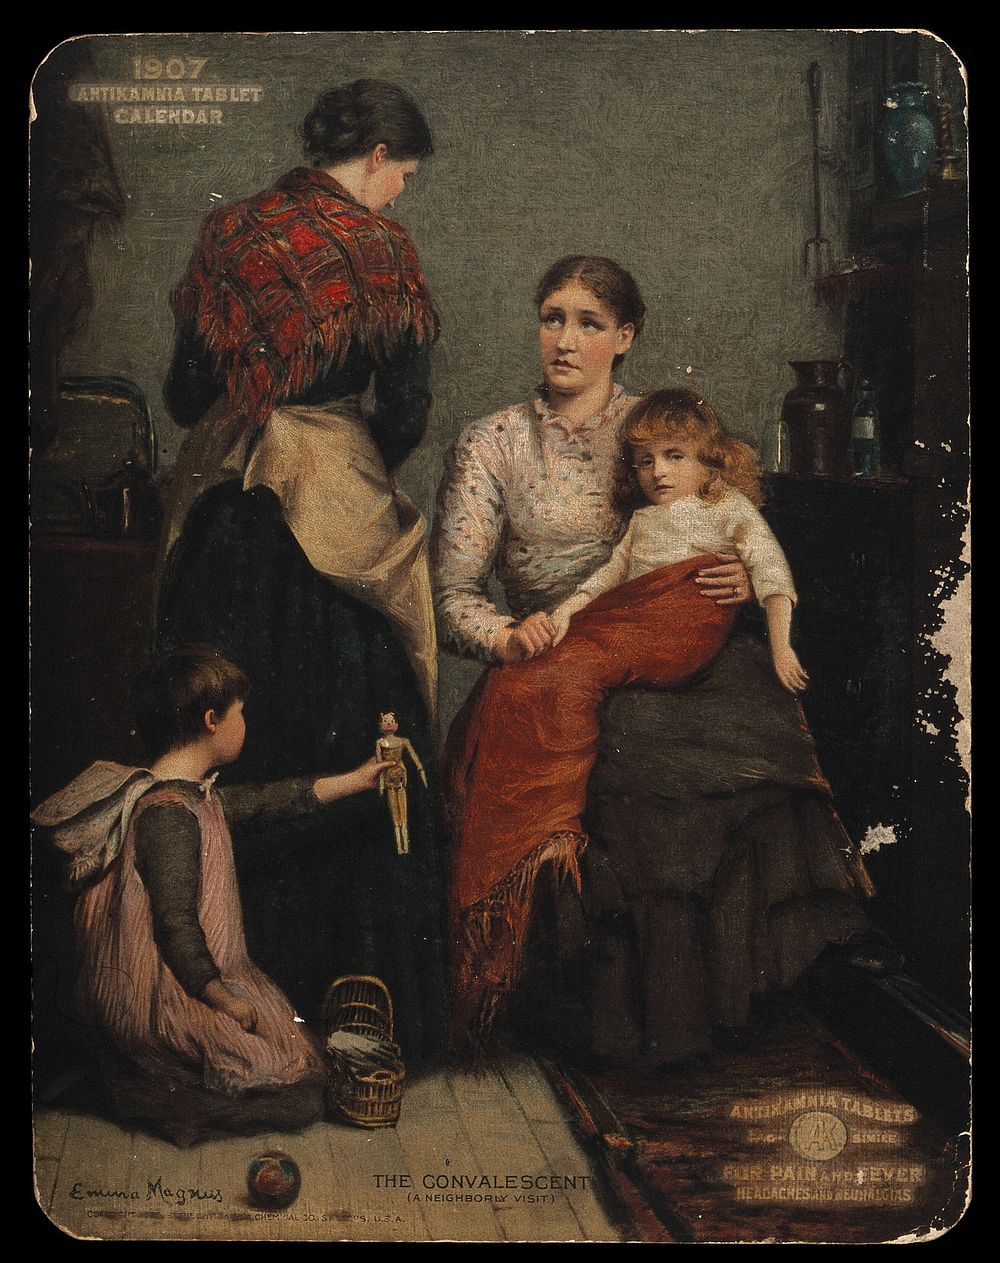 A small girl recovering from an illness and being visited by neighbours. Colour process print, 1907, after E. Magnus.